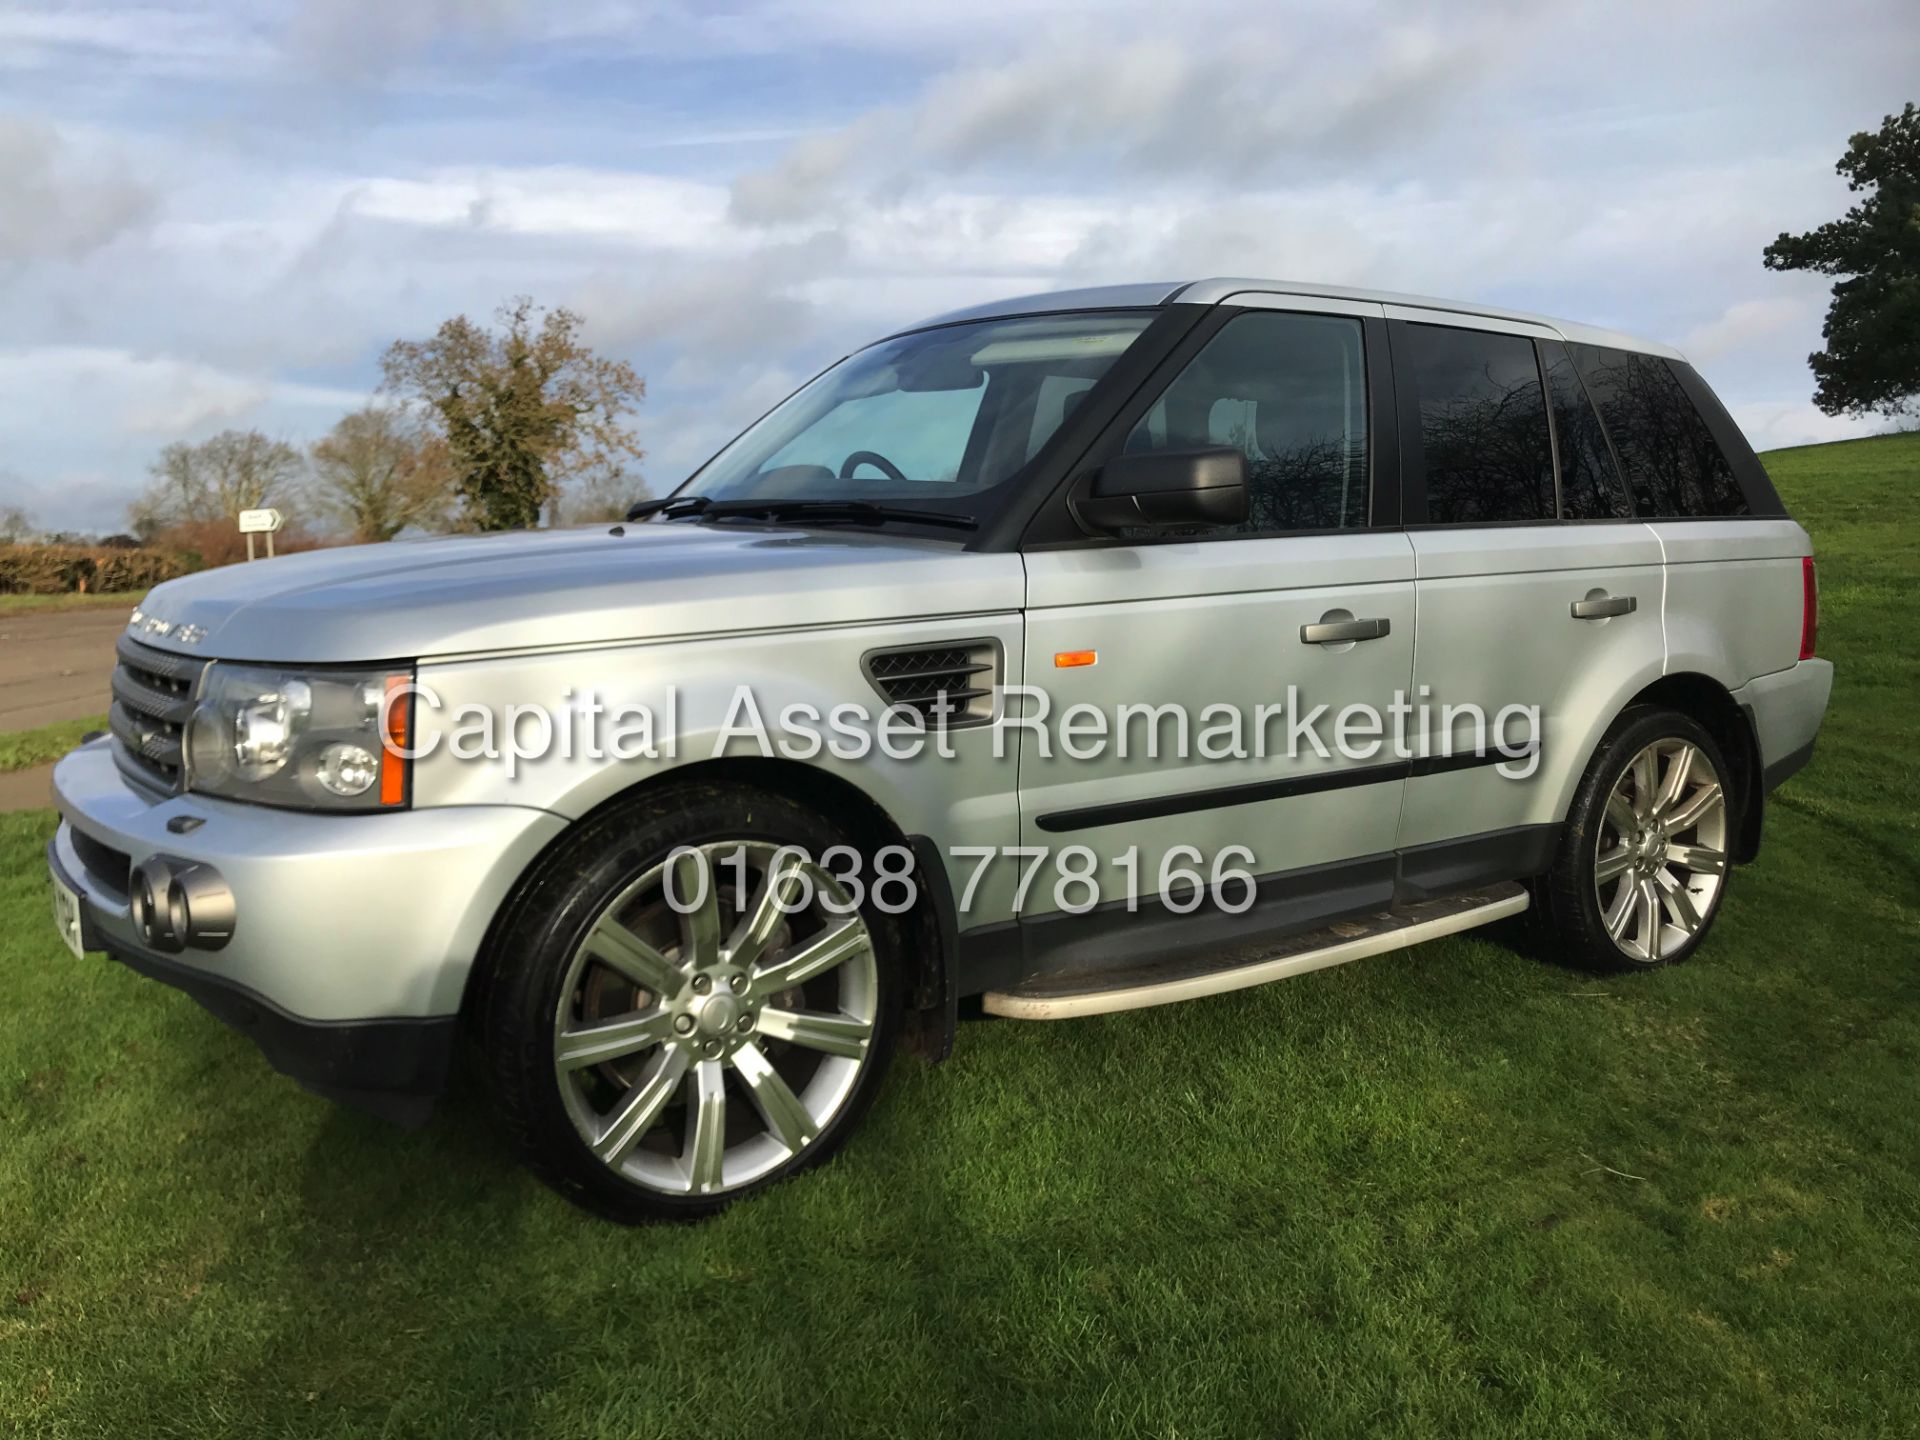 (ON SALE) RANGE ROVER SPORT 2.7TDV6 AUTO (08 REG) FULLY LOADED -SAT NAV -LEATHER-ELECTRIC EVERYTHING - Image 5 of 27